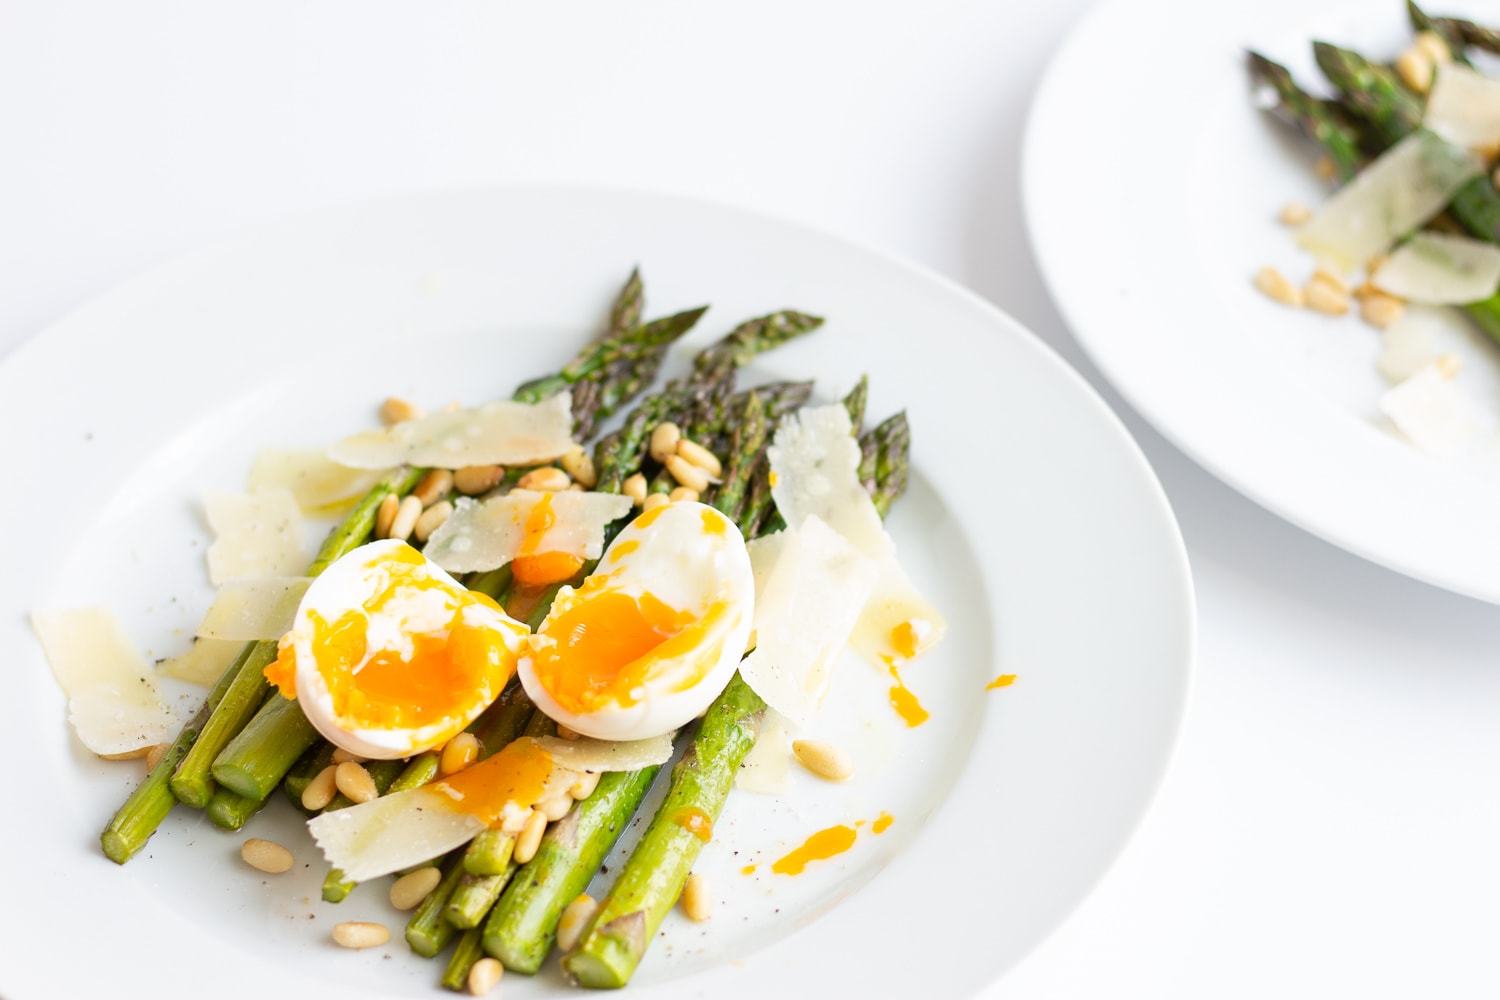 roasted asparagus on a white plate topped with soft boiled egg, parmesan shavings and toasted pine nuts